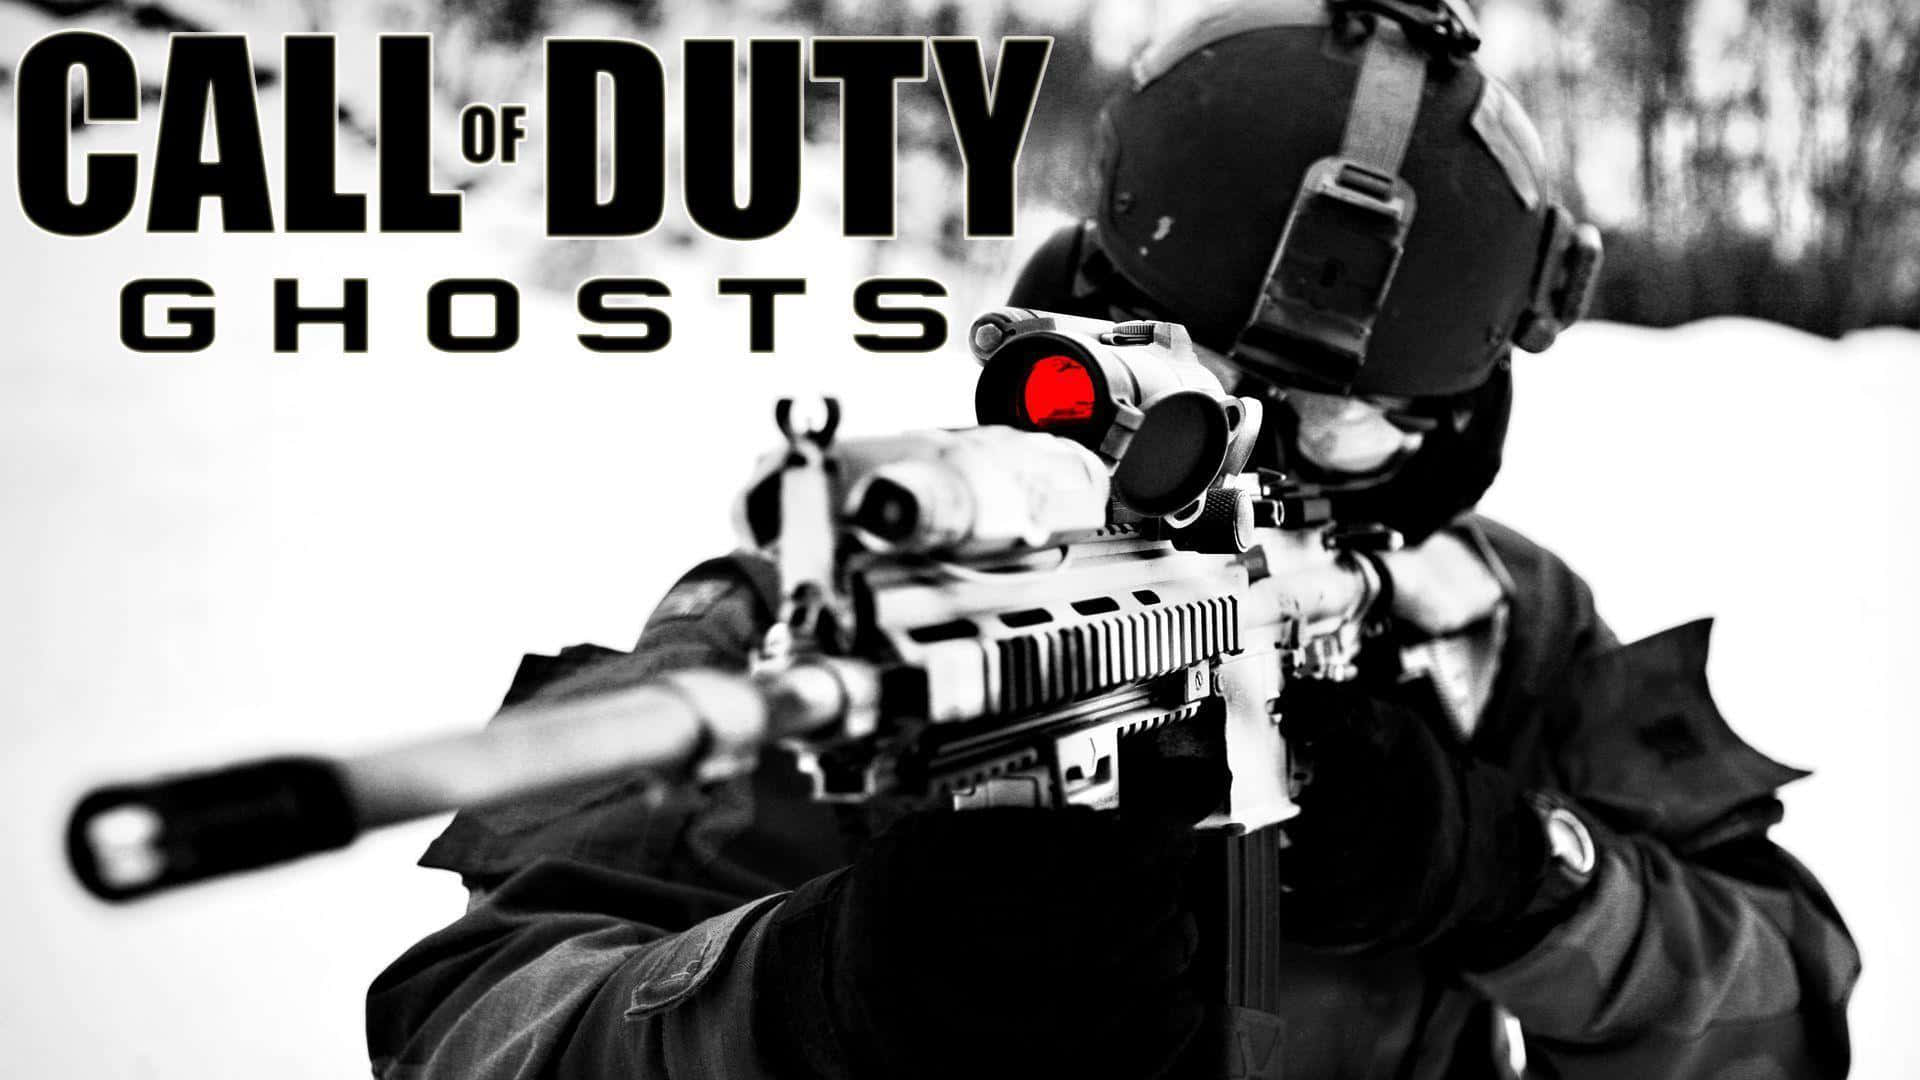 Call of Duty Ghosts 11 wallpaper  Game wallpapers  29149